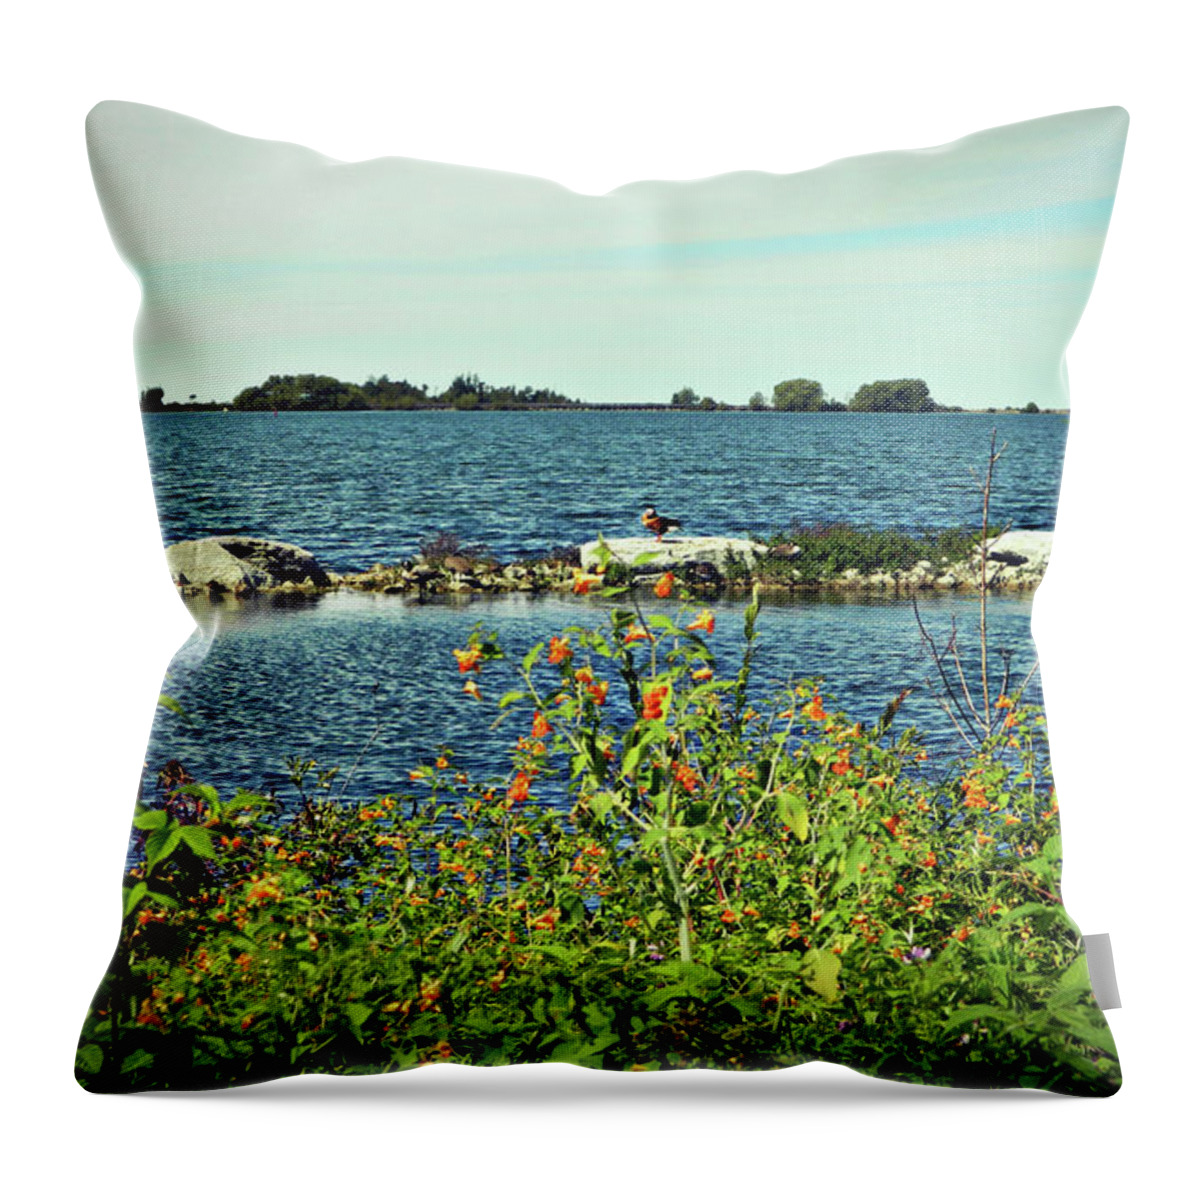 Bird Is The Word Throw Pillow featuring the photograph Bird Is The Word by Cyryn Fyrcyd